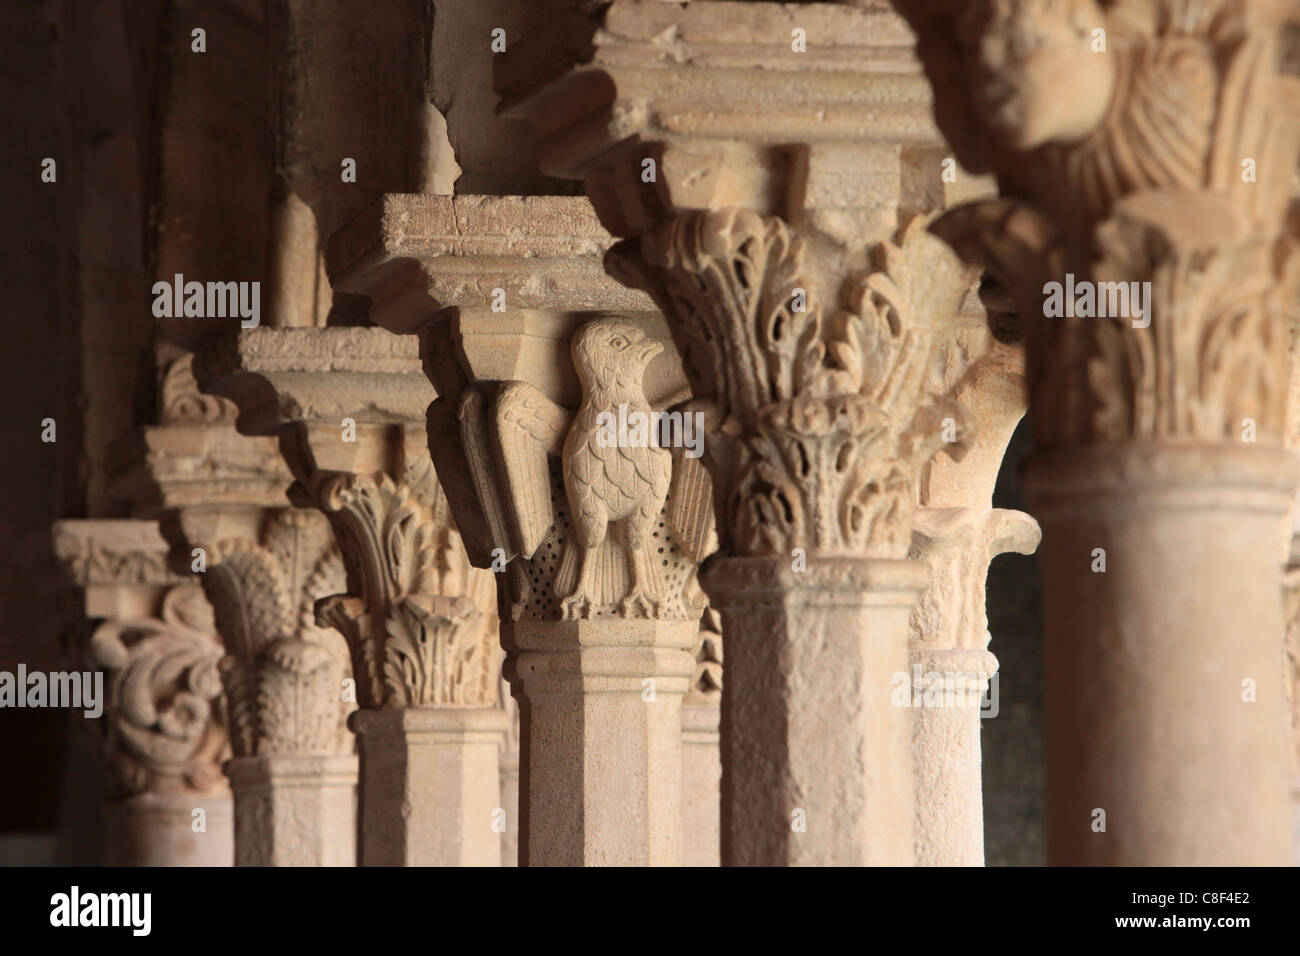 Capitals in the Cloister of Saint Sauveur cathedral, Aix en Provence, Bouches du Rhone, France Stock Photo